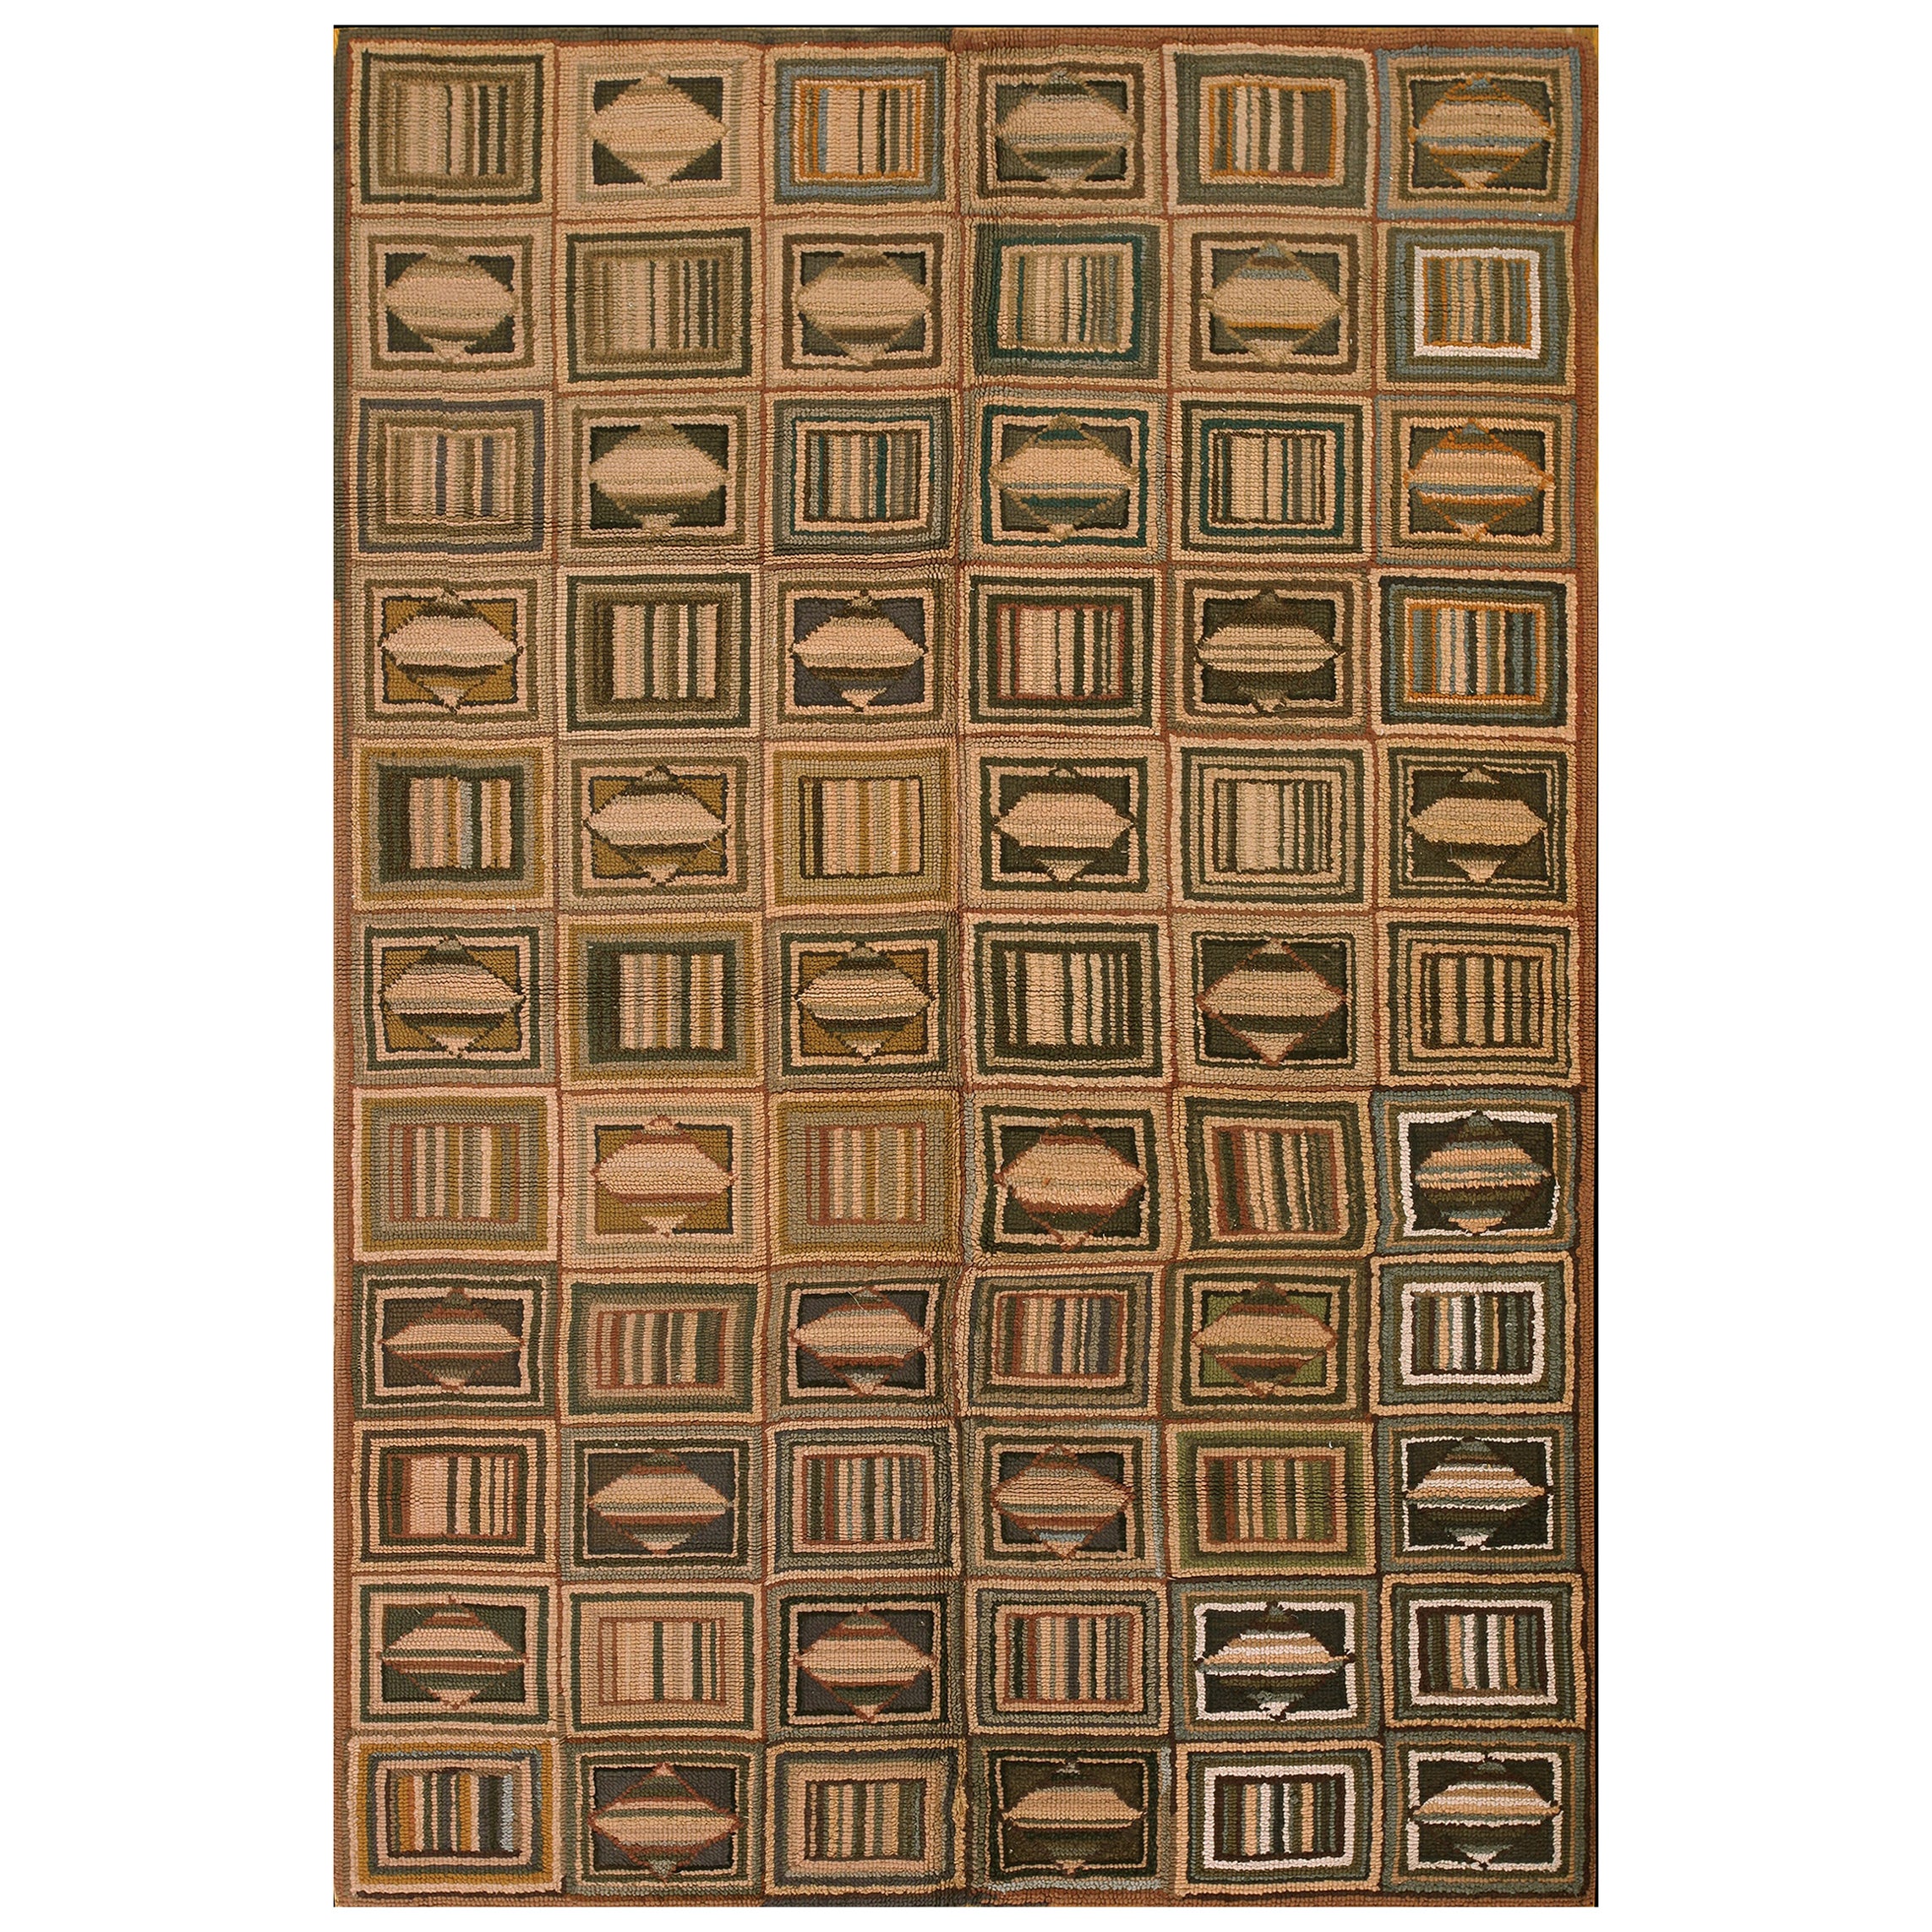 Vintage Mid 20th Century American Hooked Rug (6' x 8' 9" - 183 x 267 cm ) For Sale